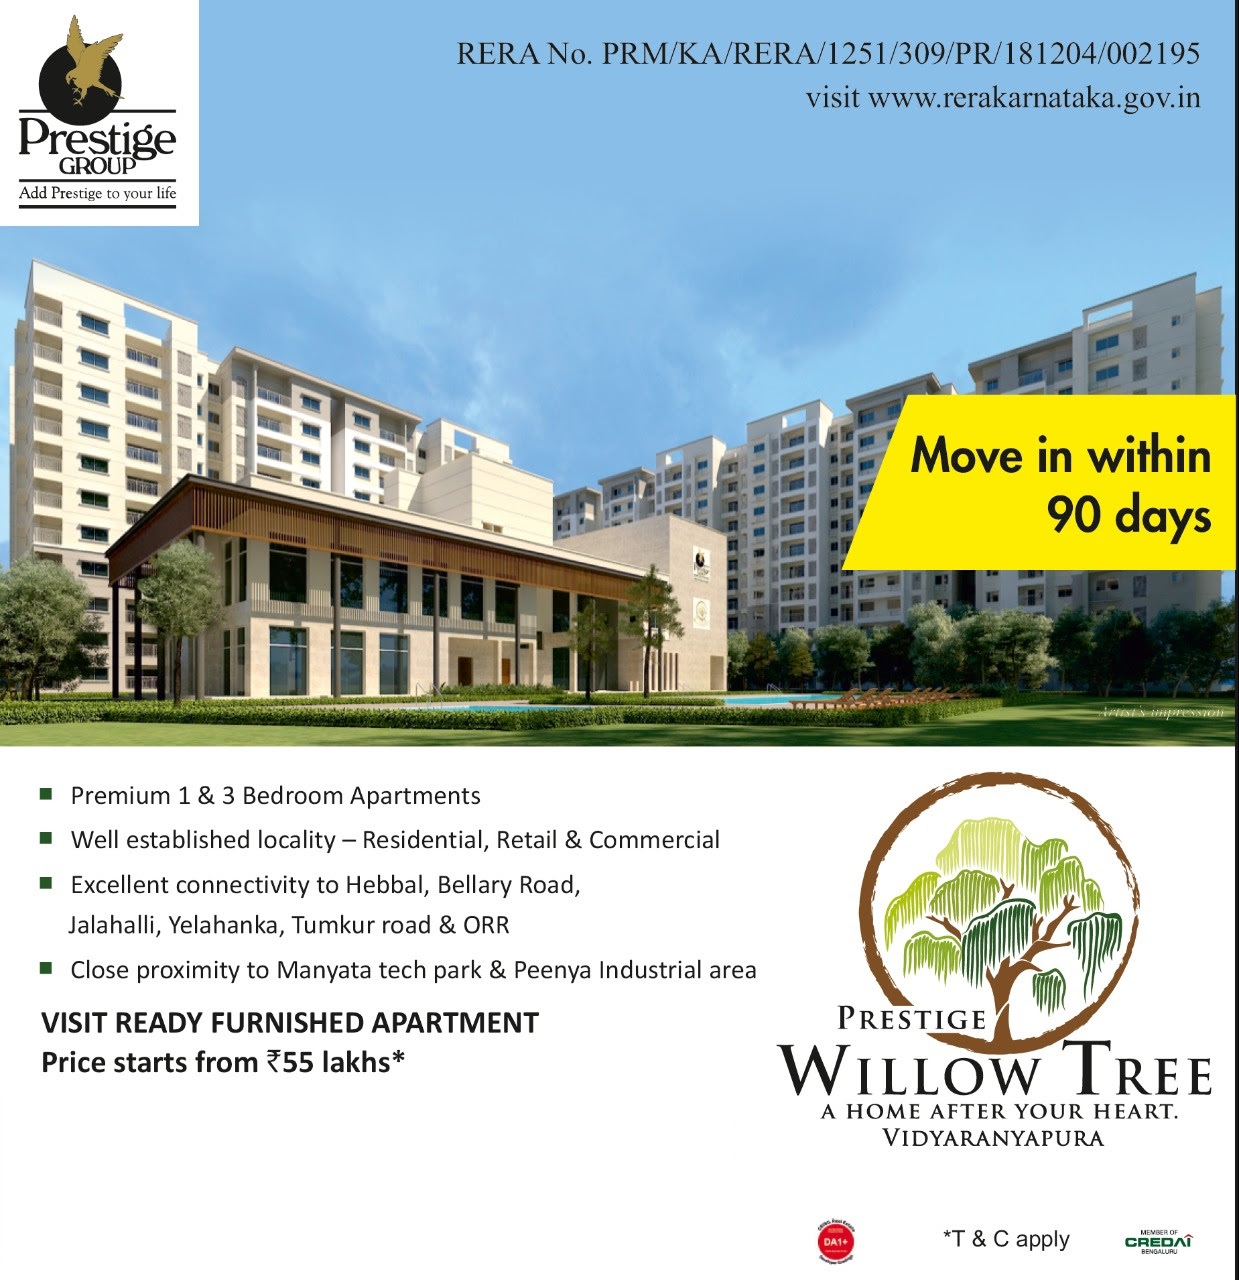 Move in within 90 days at Prestige Willow Tree, Bangalore